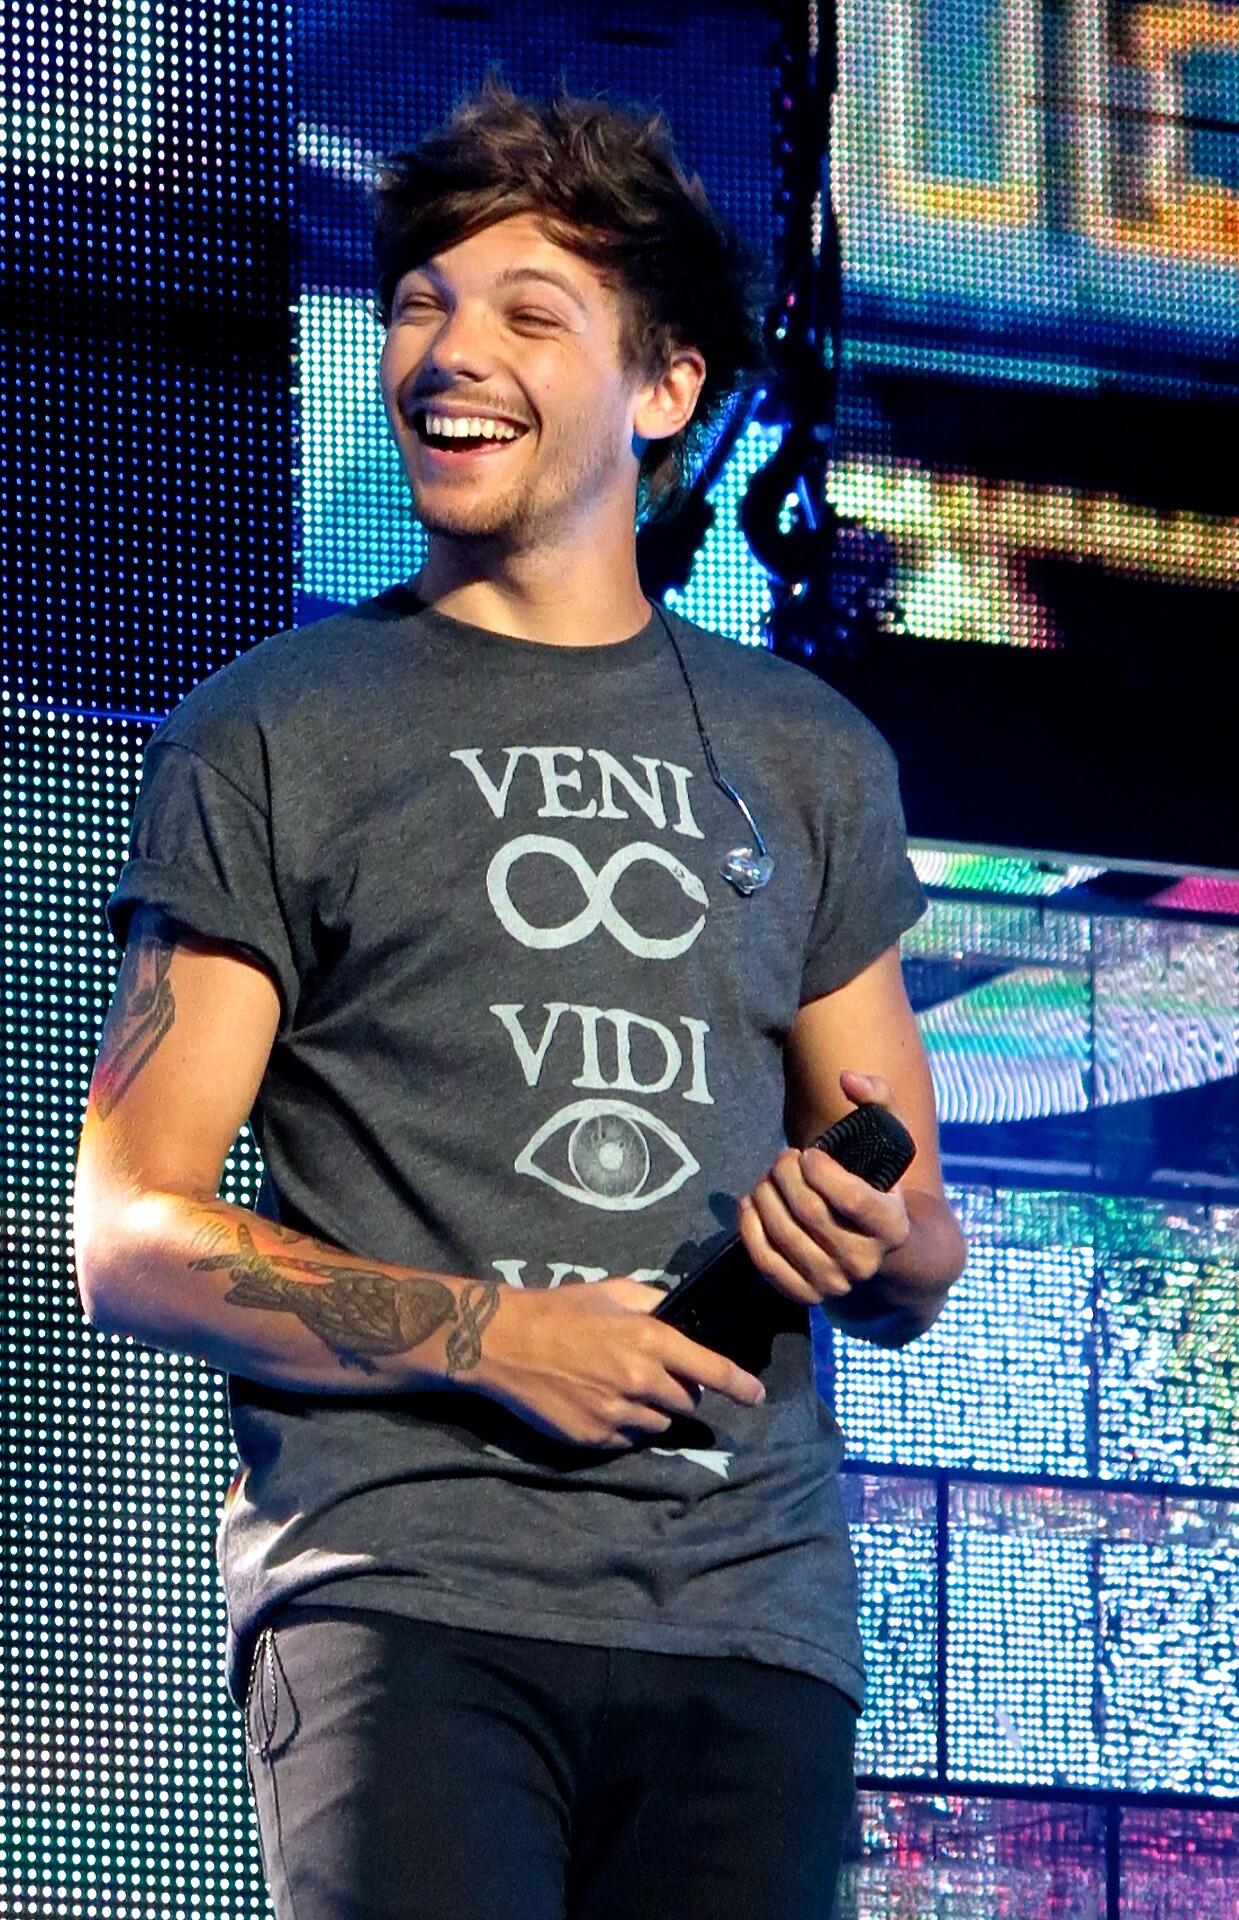 [TMH tour 2013] Photos - Page 8 BROkpl-CUAANphY